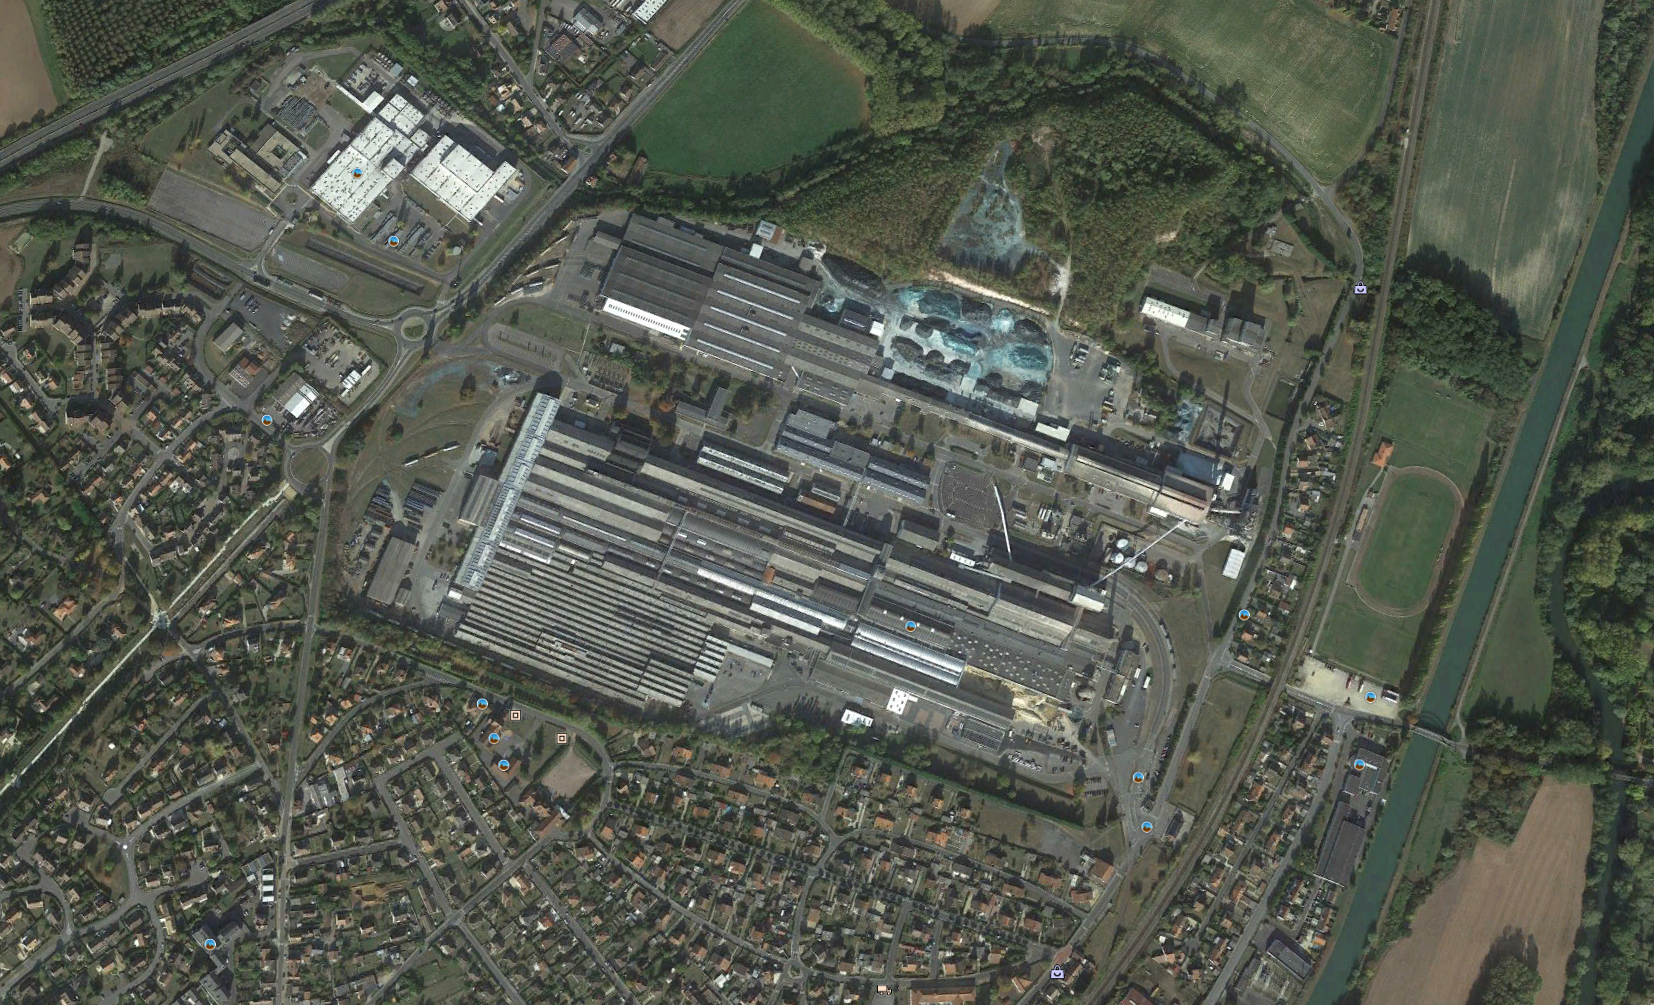 Saint gobain factory in thourotte france